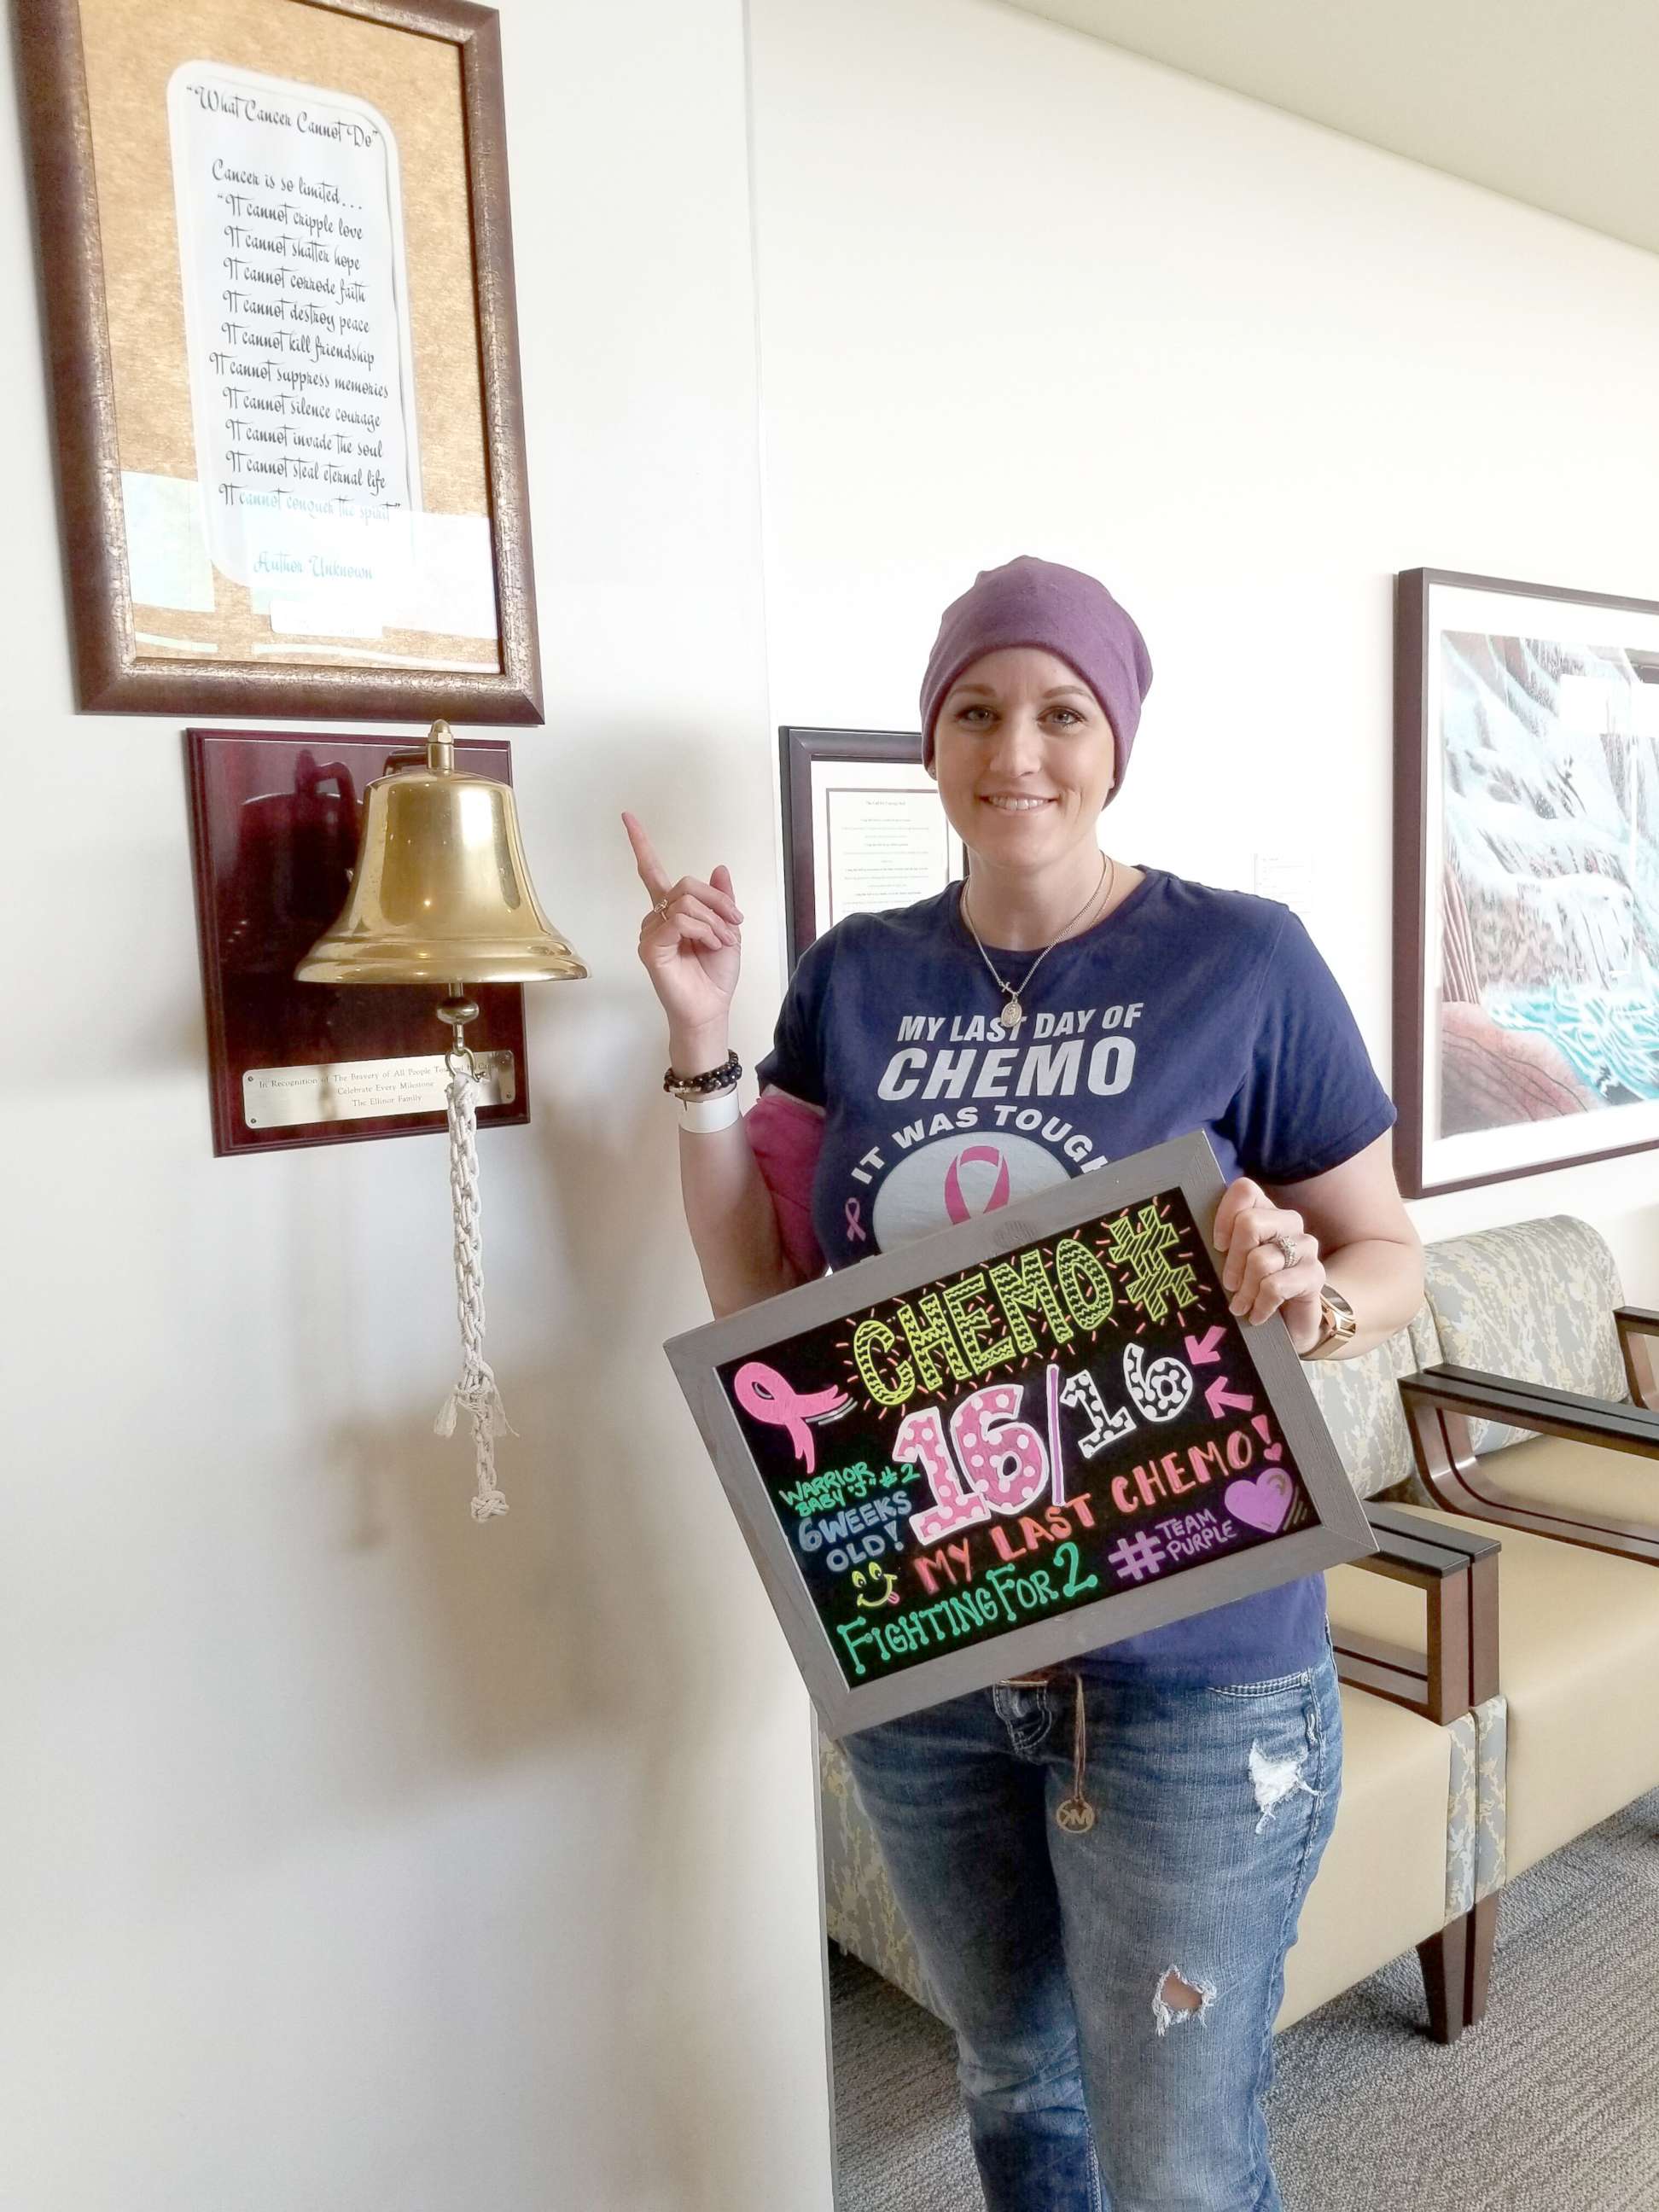 PHOTO: Jessica Purcell, 36, rings the bell on her last day of chemotherapy treatment at Moffitt Cancer Center in Tampa, Florida.